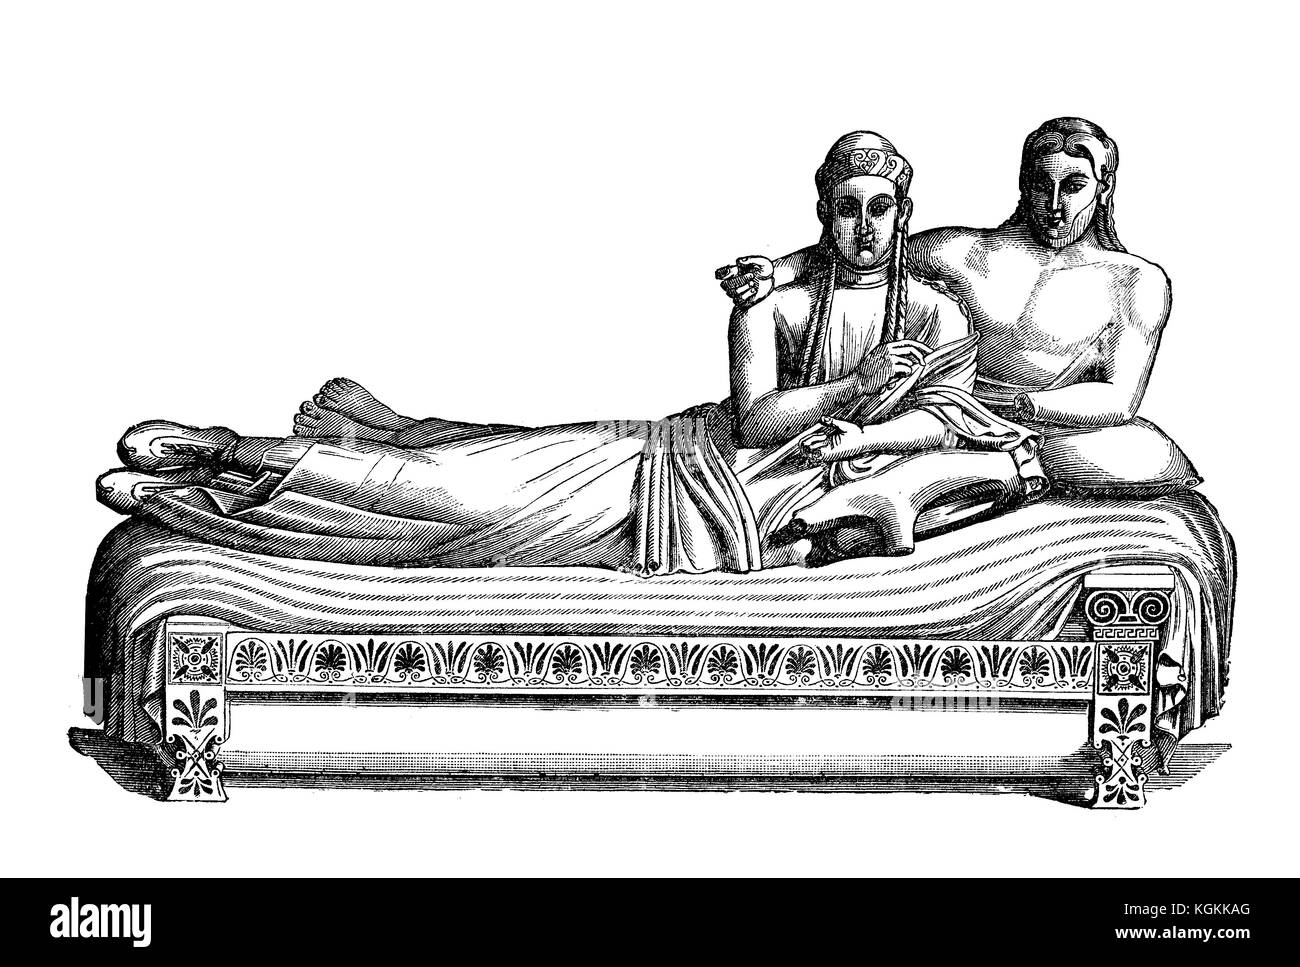 Sarcophagus of the Spouses, made in terracotta in VI century BC, masterpiece of Etruscan art from Caere (today Cerveteri),represents a married couple banqueting together in the afterlife Stock Photo